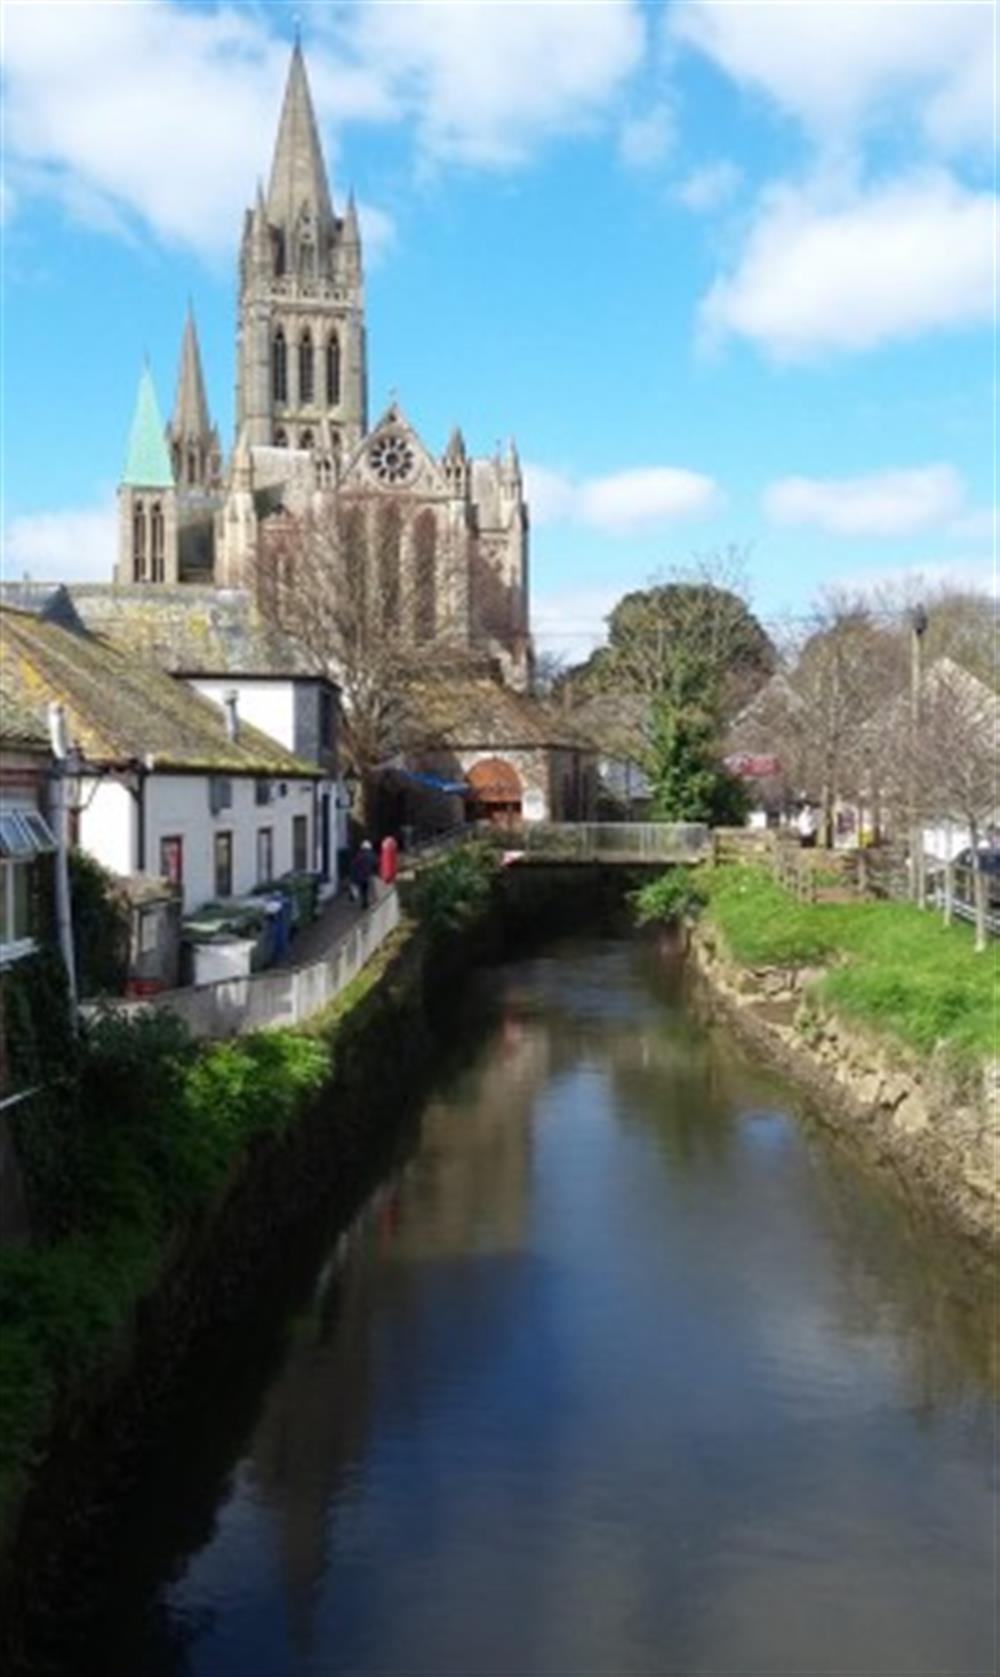 Truro is our main shopping centre. Be sure to visit the beautiful cathedral.